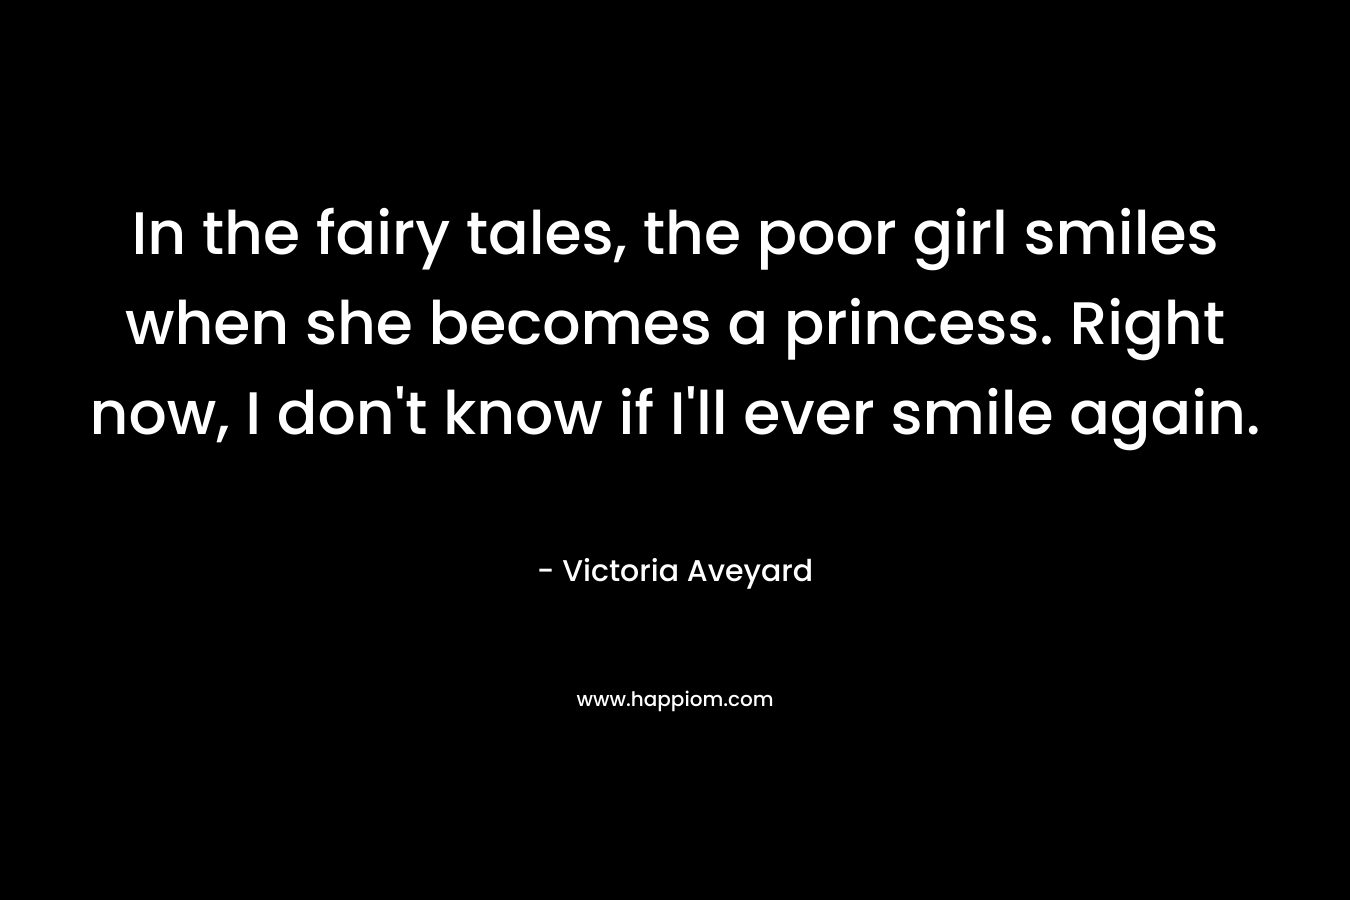 In the fairy tales, the poor girl smiles when she becomes a princess. Right now, I don’t know if I’ll ever smile again. – Victoria Aveyard